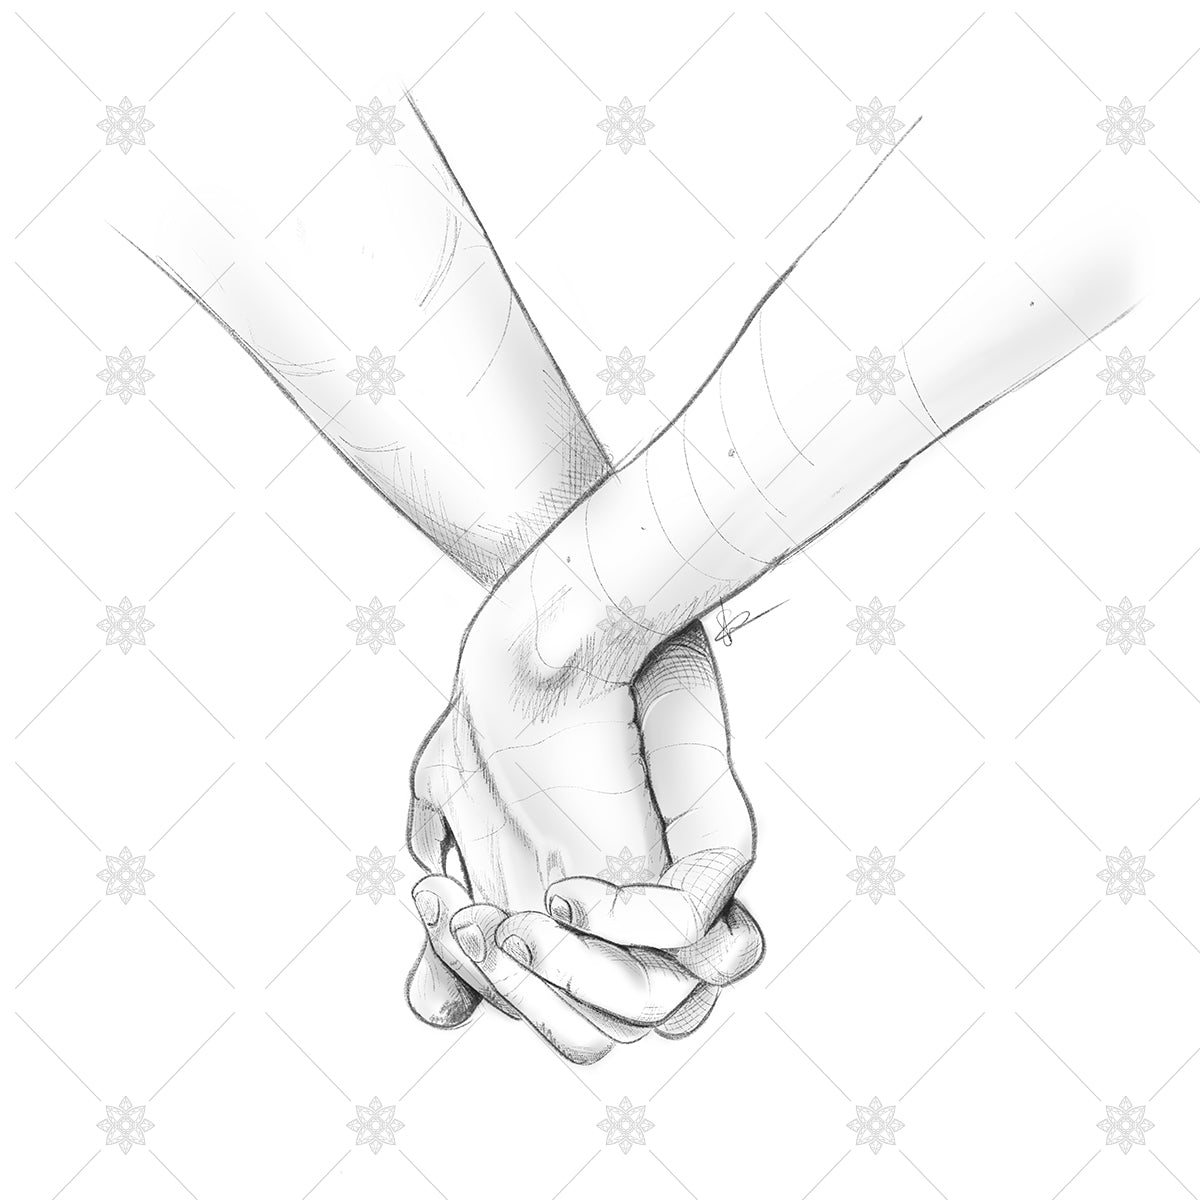 pencil sketch holding hands couple